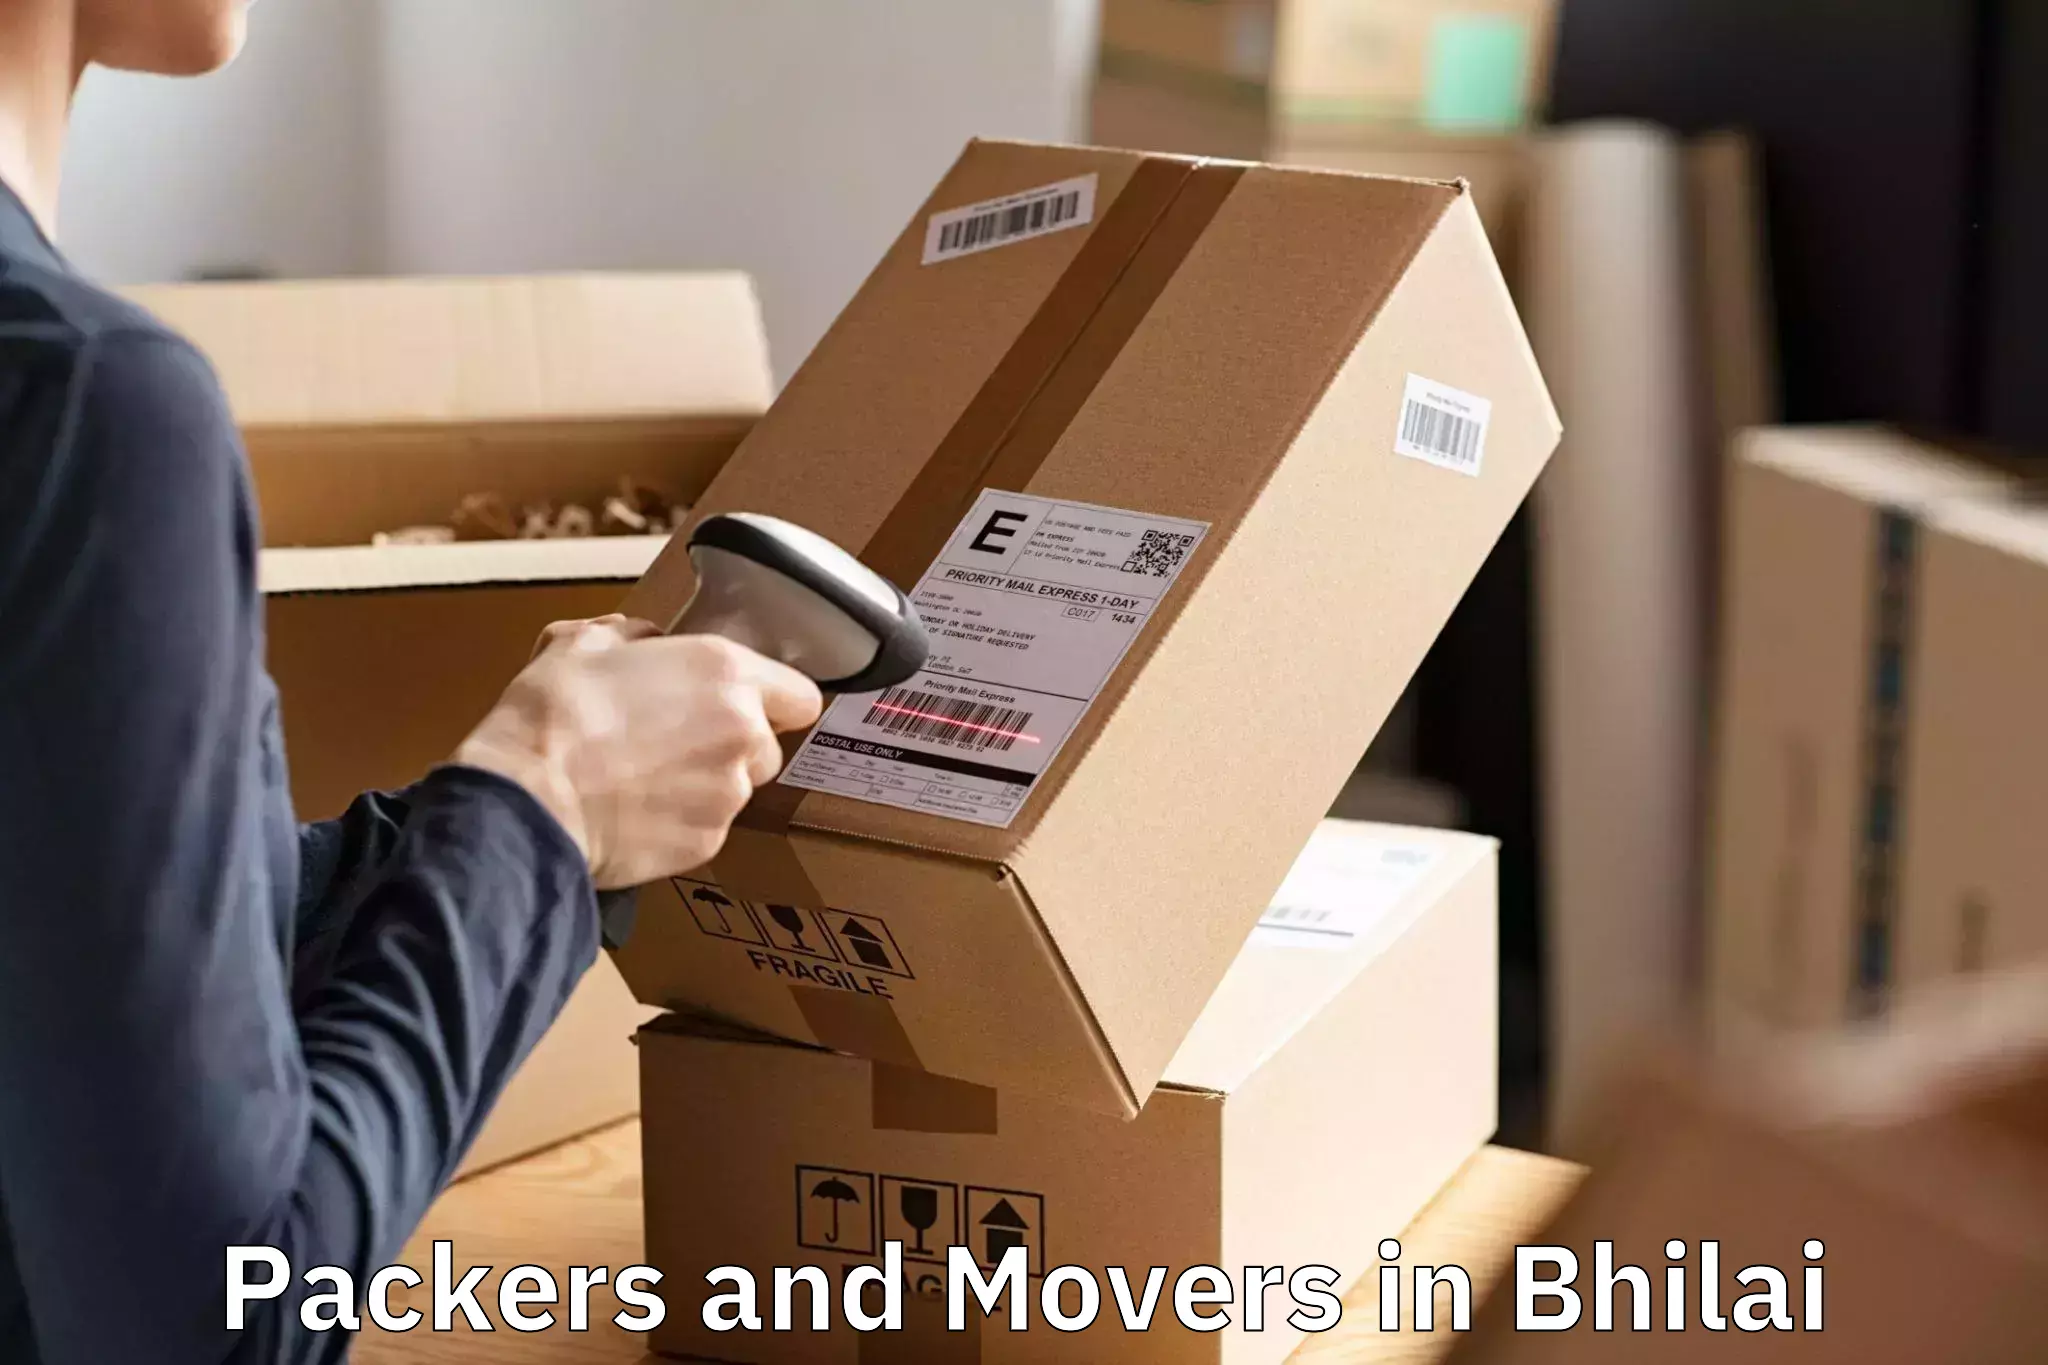 Affordable Packers And Movers in Bhilai, Chhattisgarh (CG)